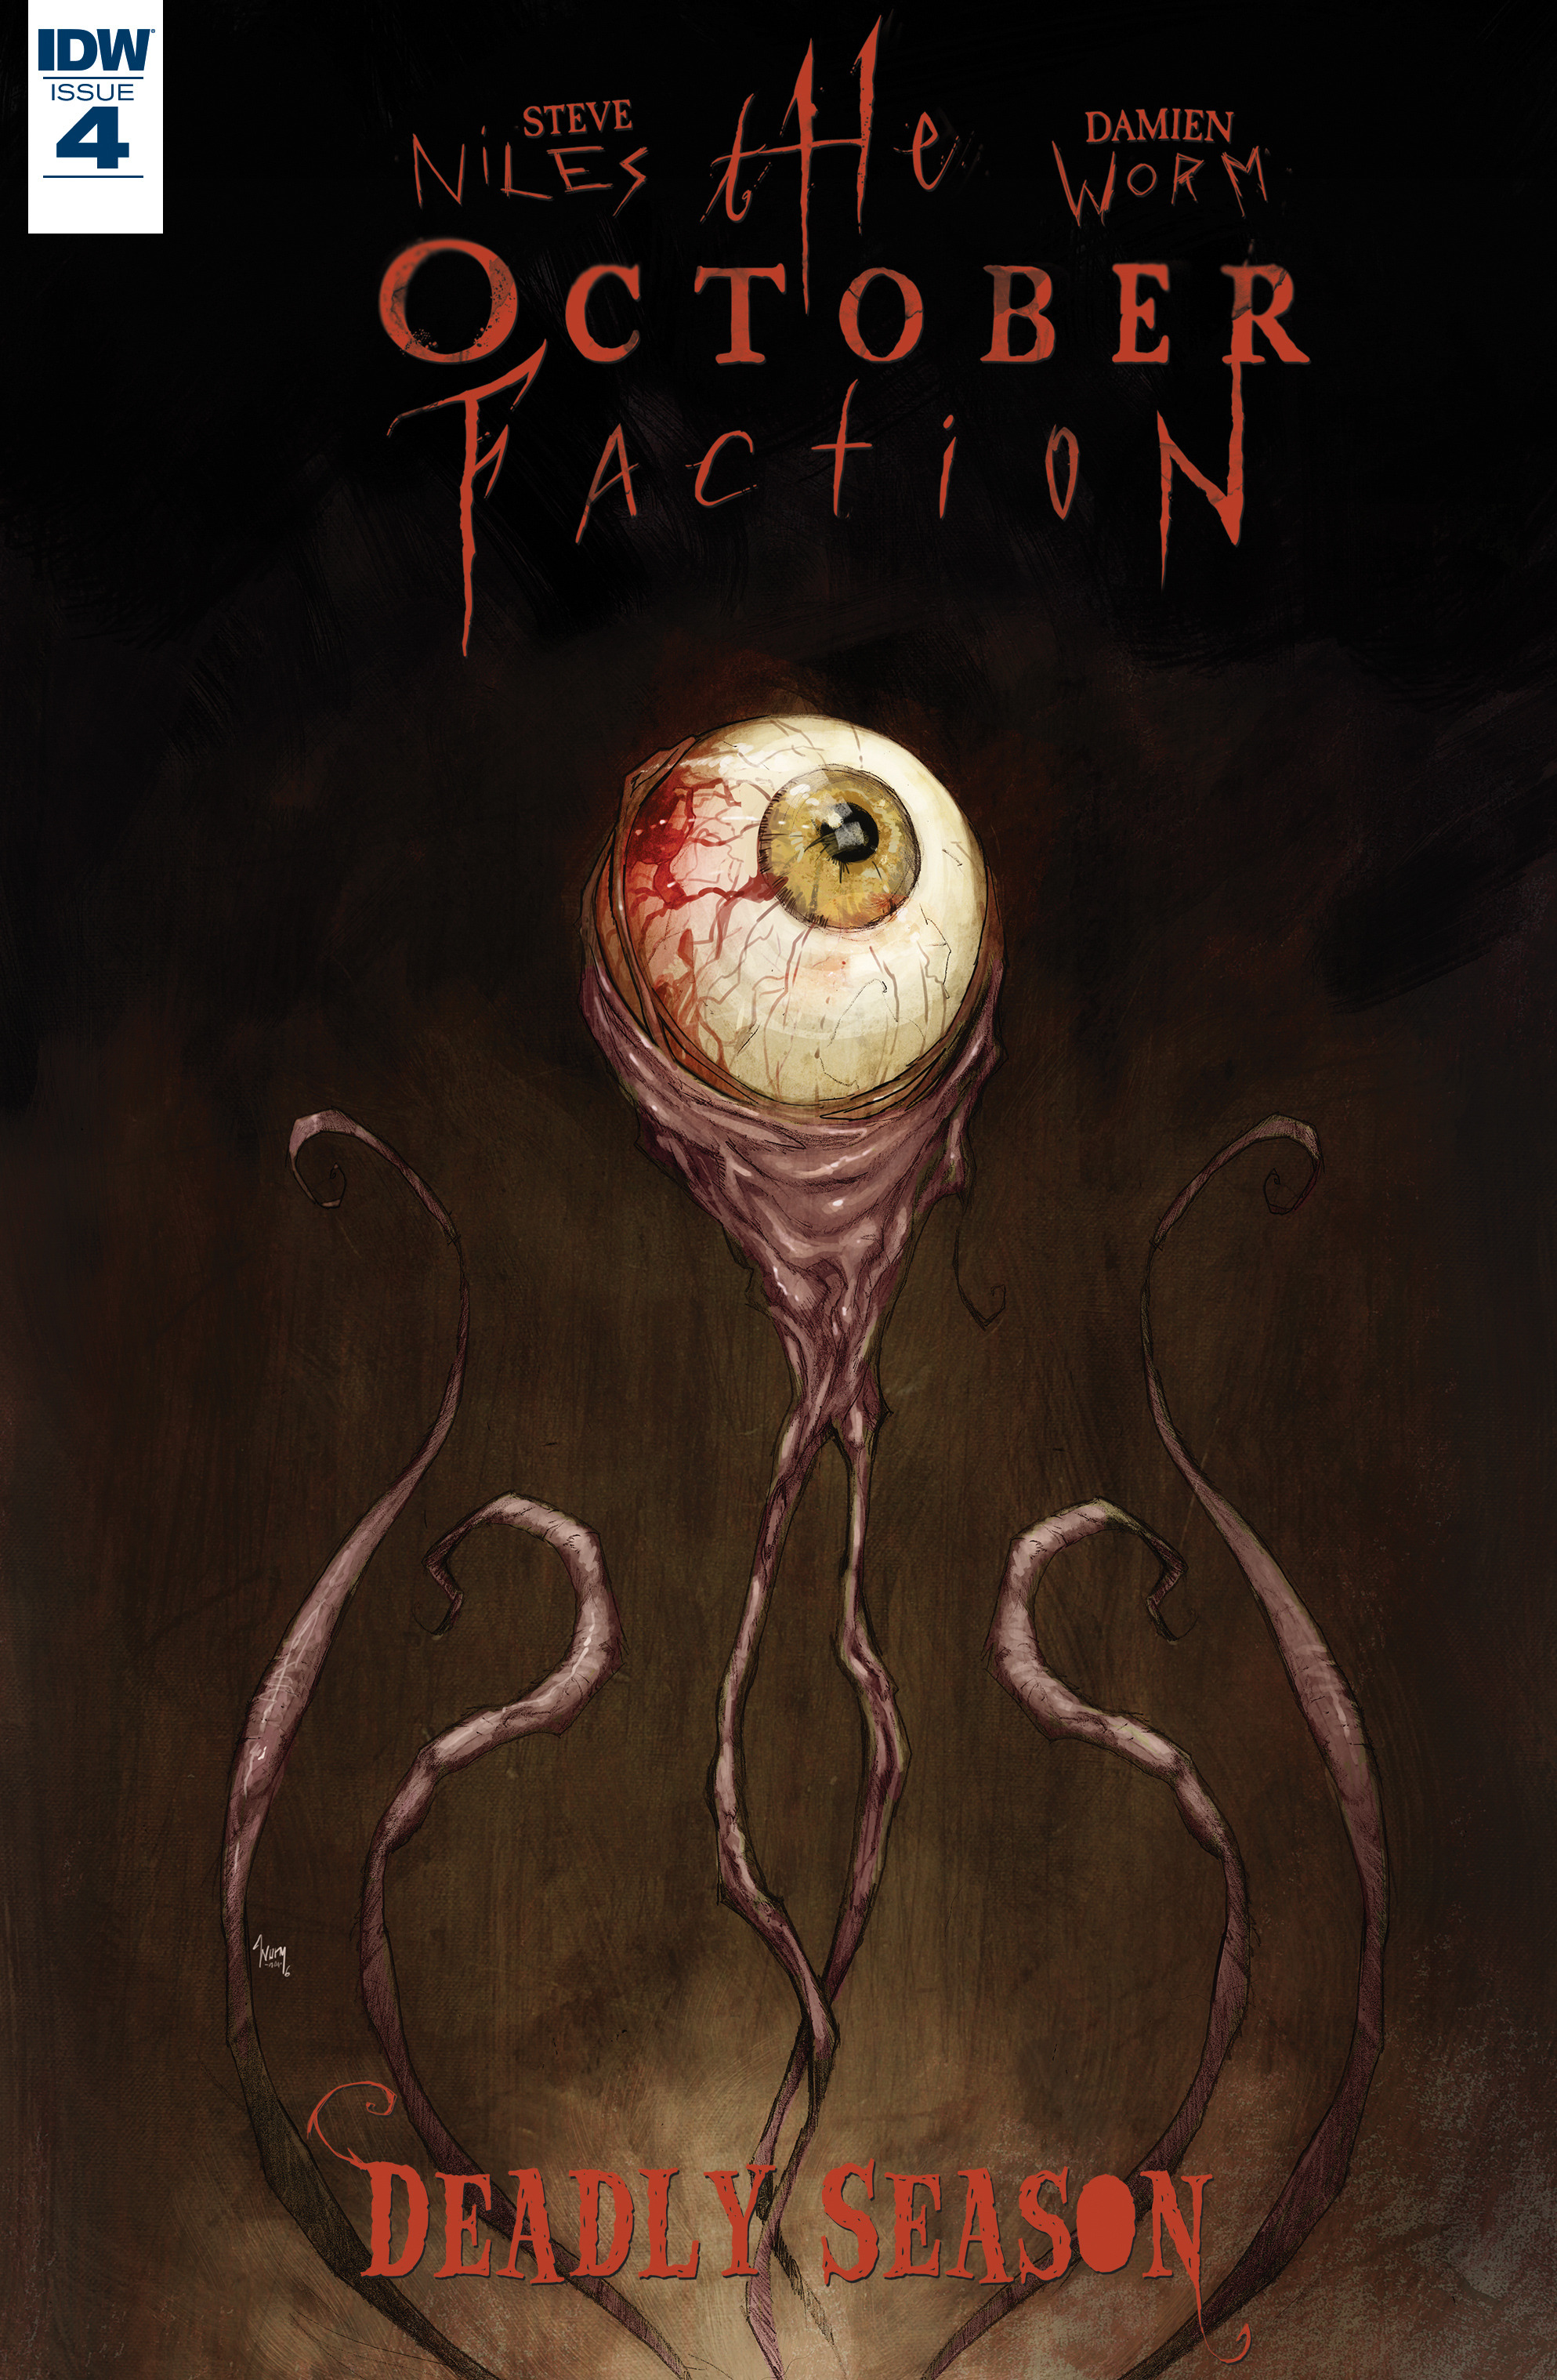 Read online The October Faction: Deadly Season comic -  Issue #4 - 1